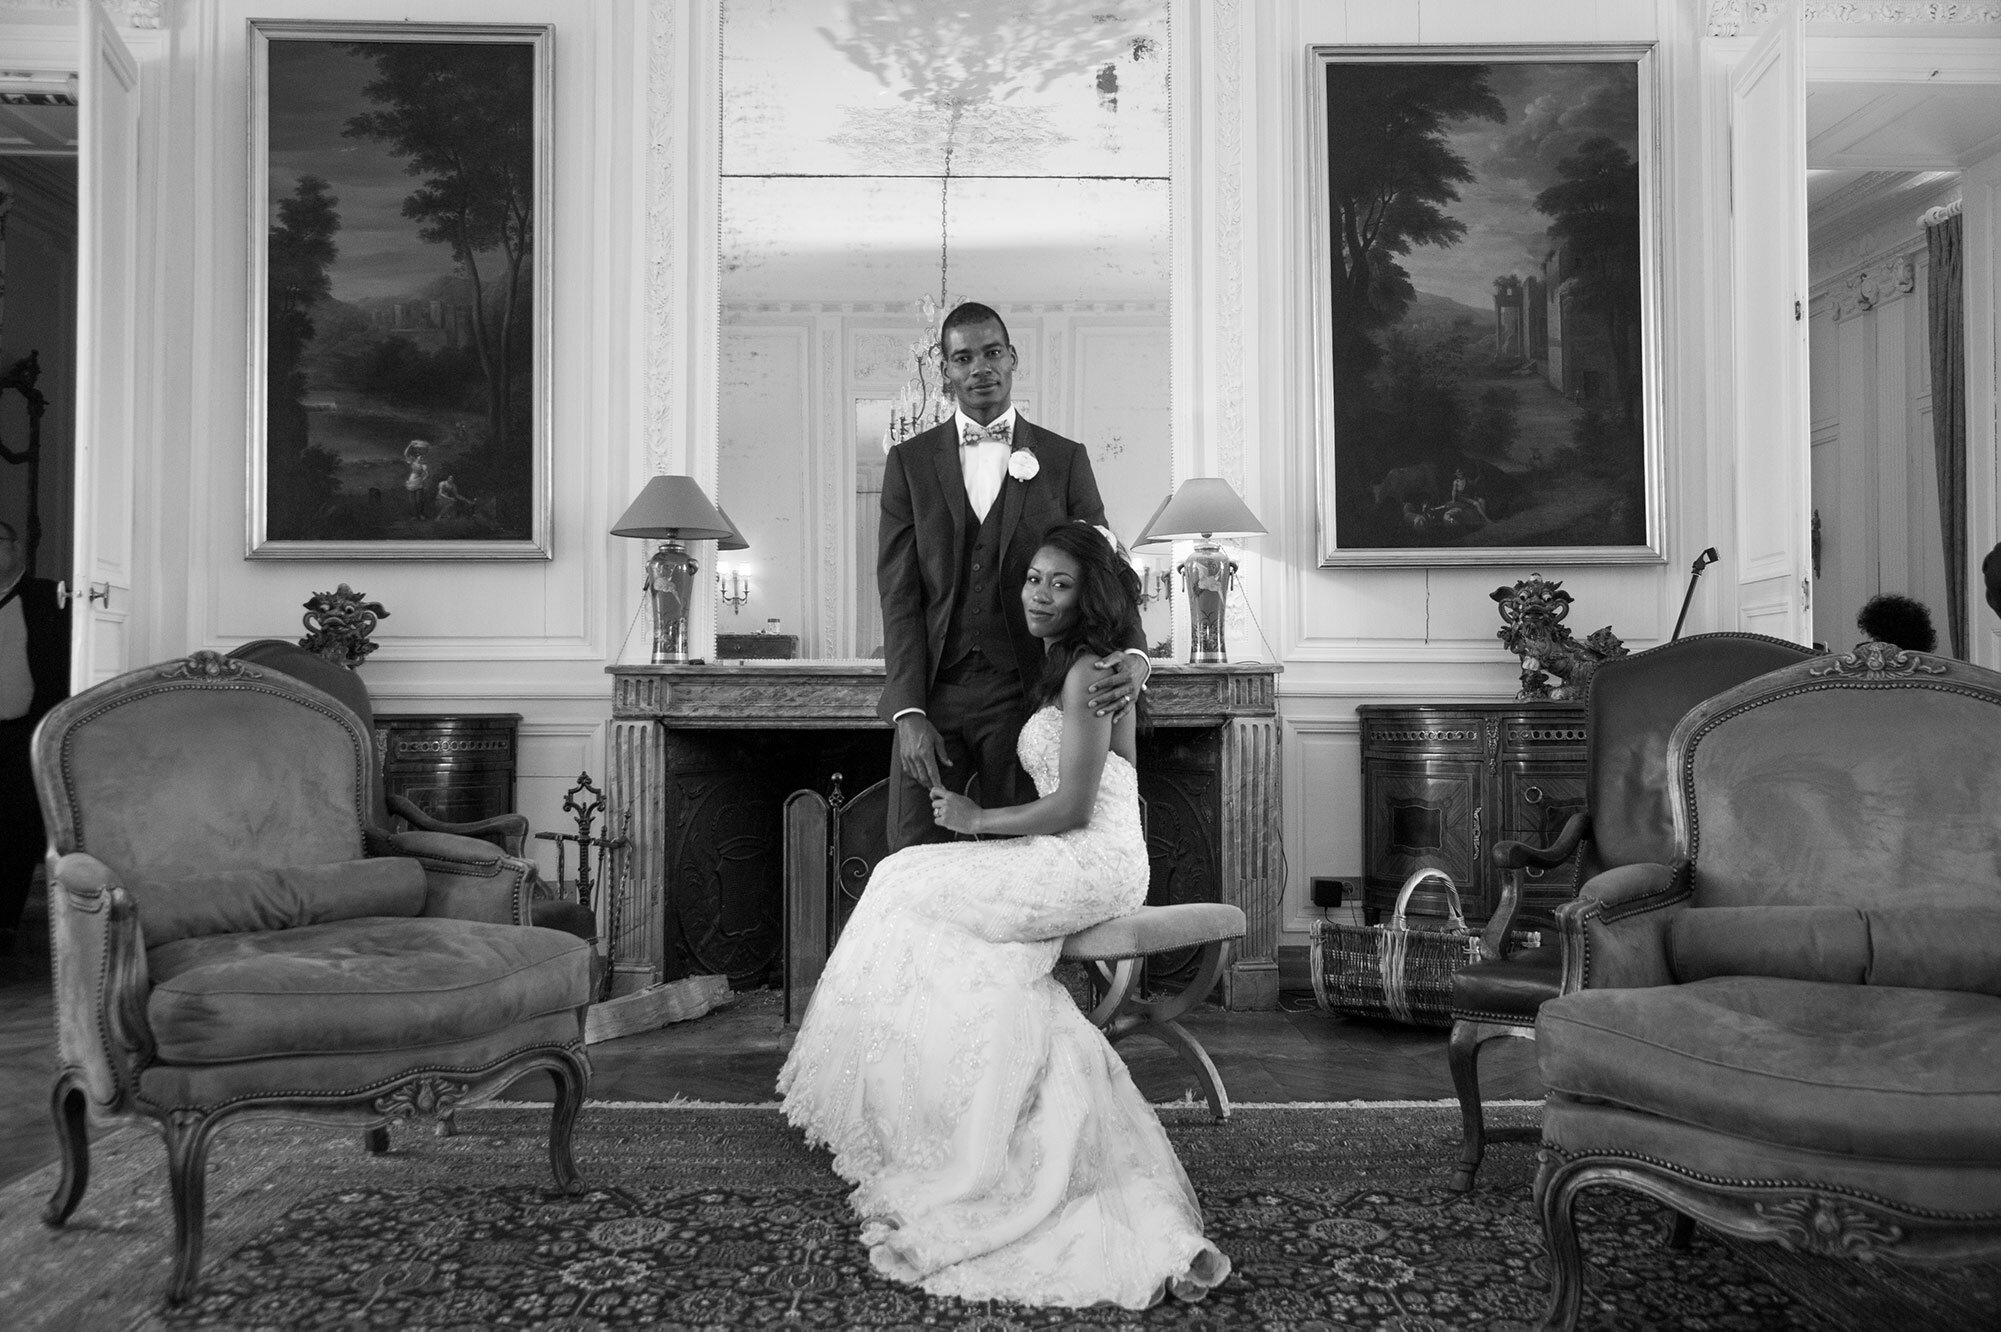 A black and white photo of a bride and groom posing in the living room of a grand chateau wedding venue.